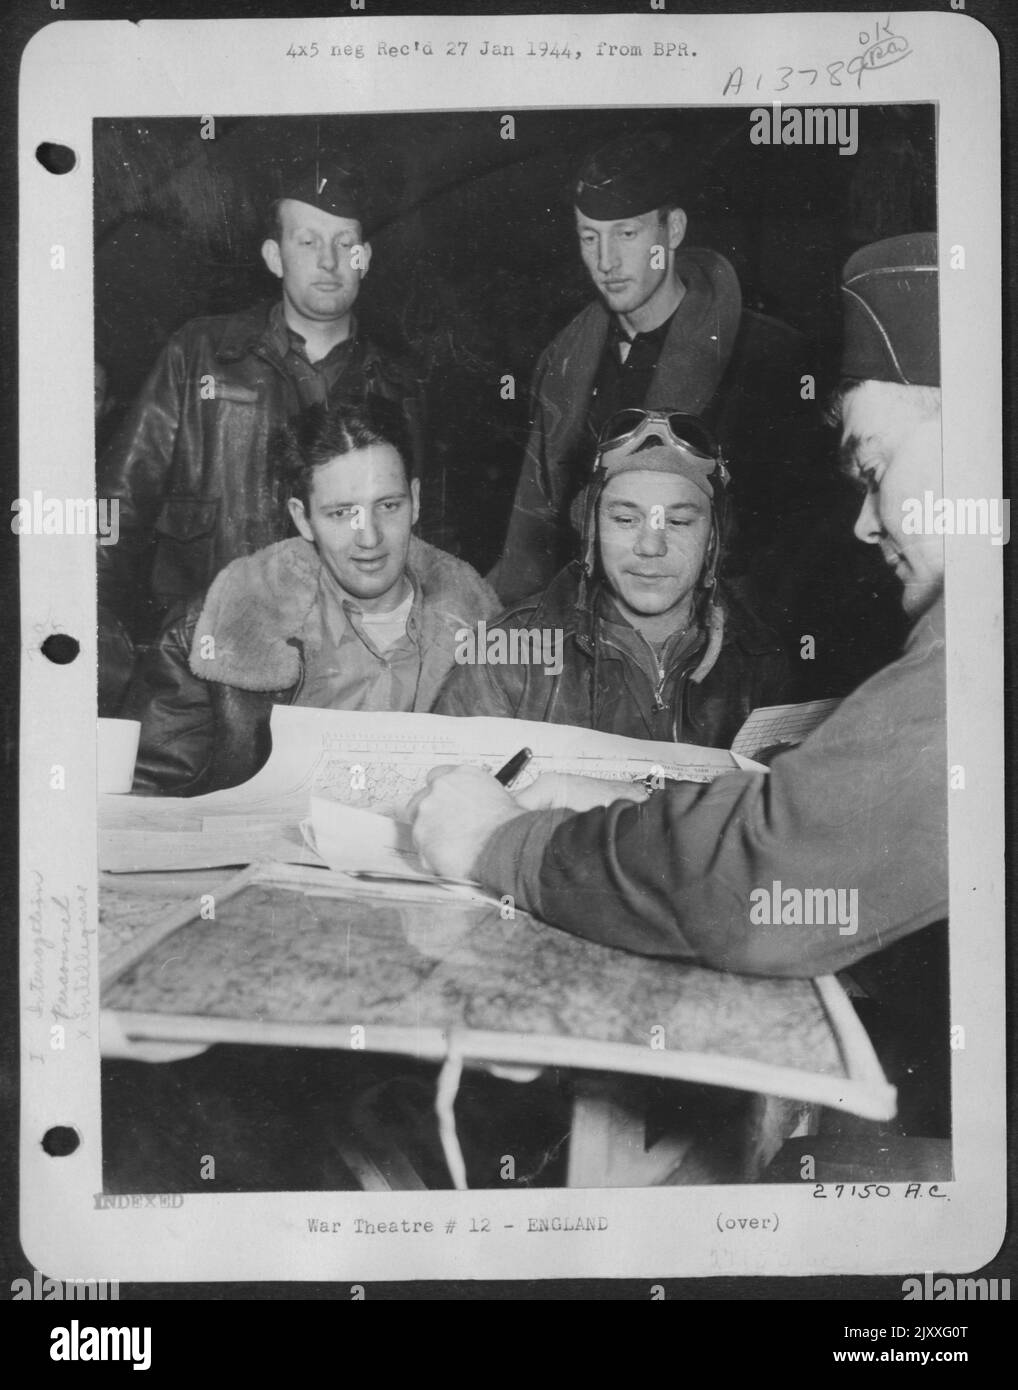 HIS TOUR OF MISSIONS COMPLETED: 1st Lt. Leroy Faringer (wearing goggles) sits for final interrogation on his return from a bombing mission over northwest Germany on 22 Dec. Lt. Faringer, 27, of Texarkana, Texas, is navigator of ofrtress 'Demo Stock Photo